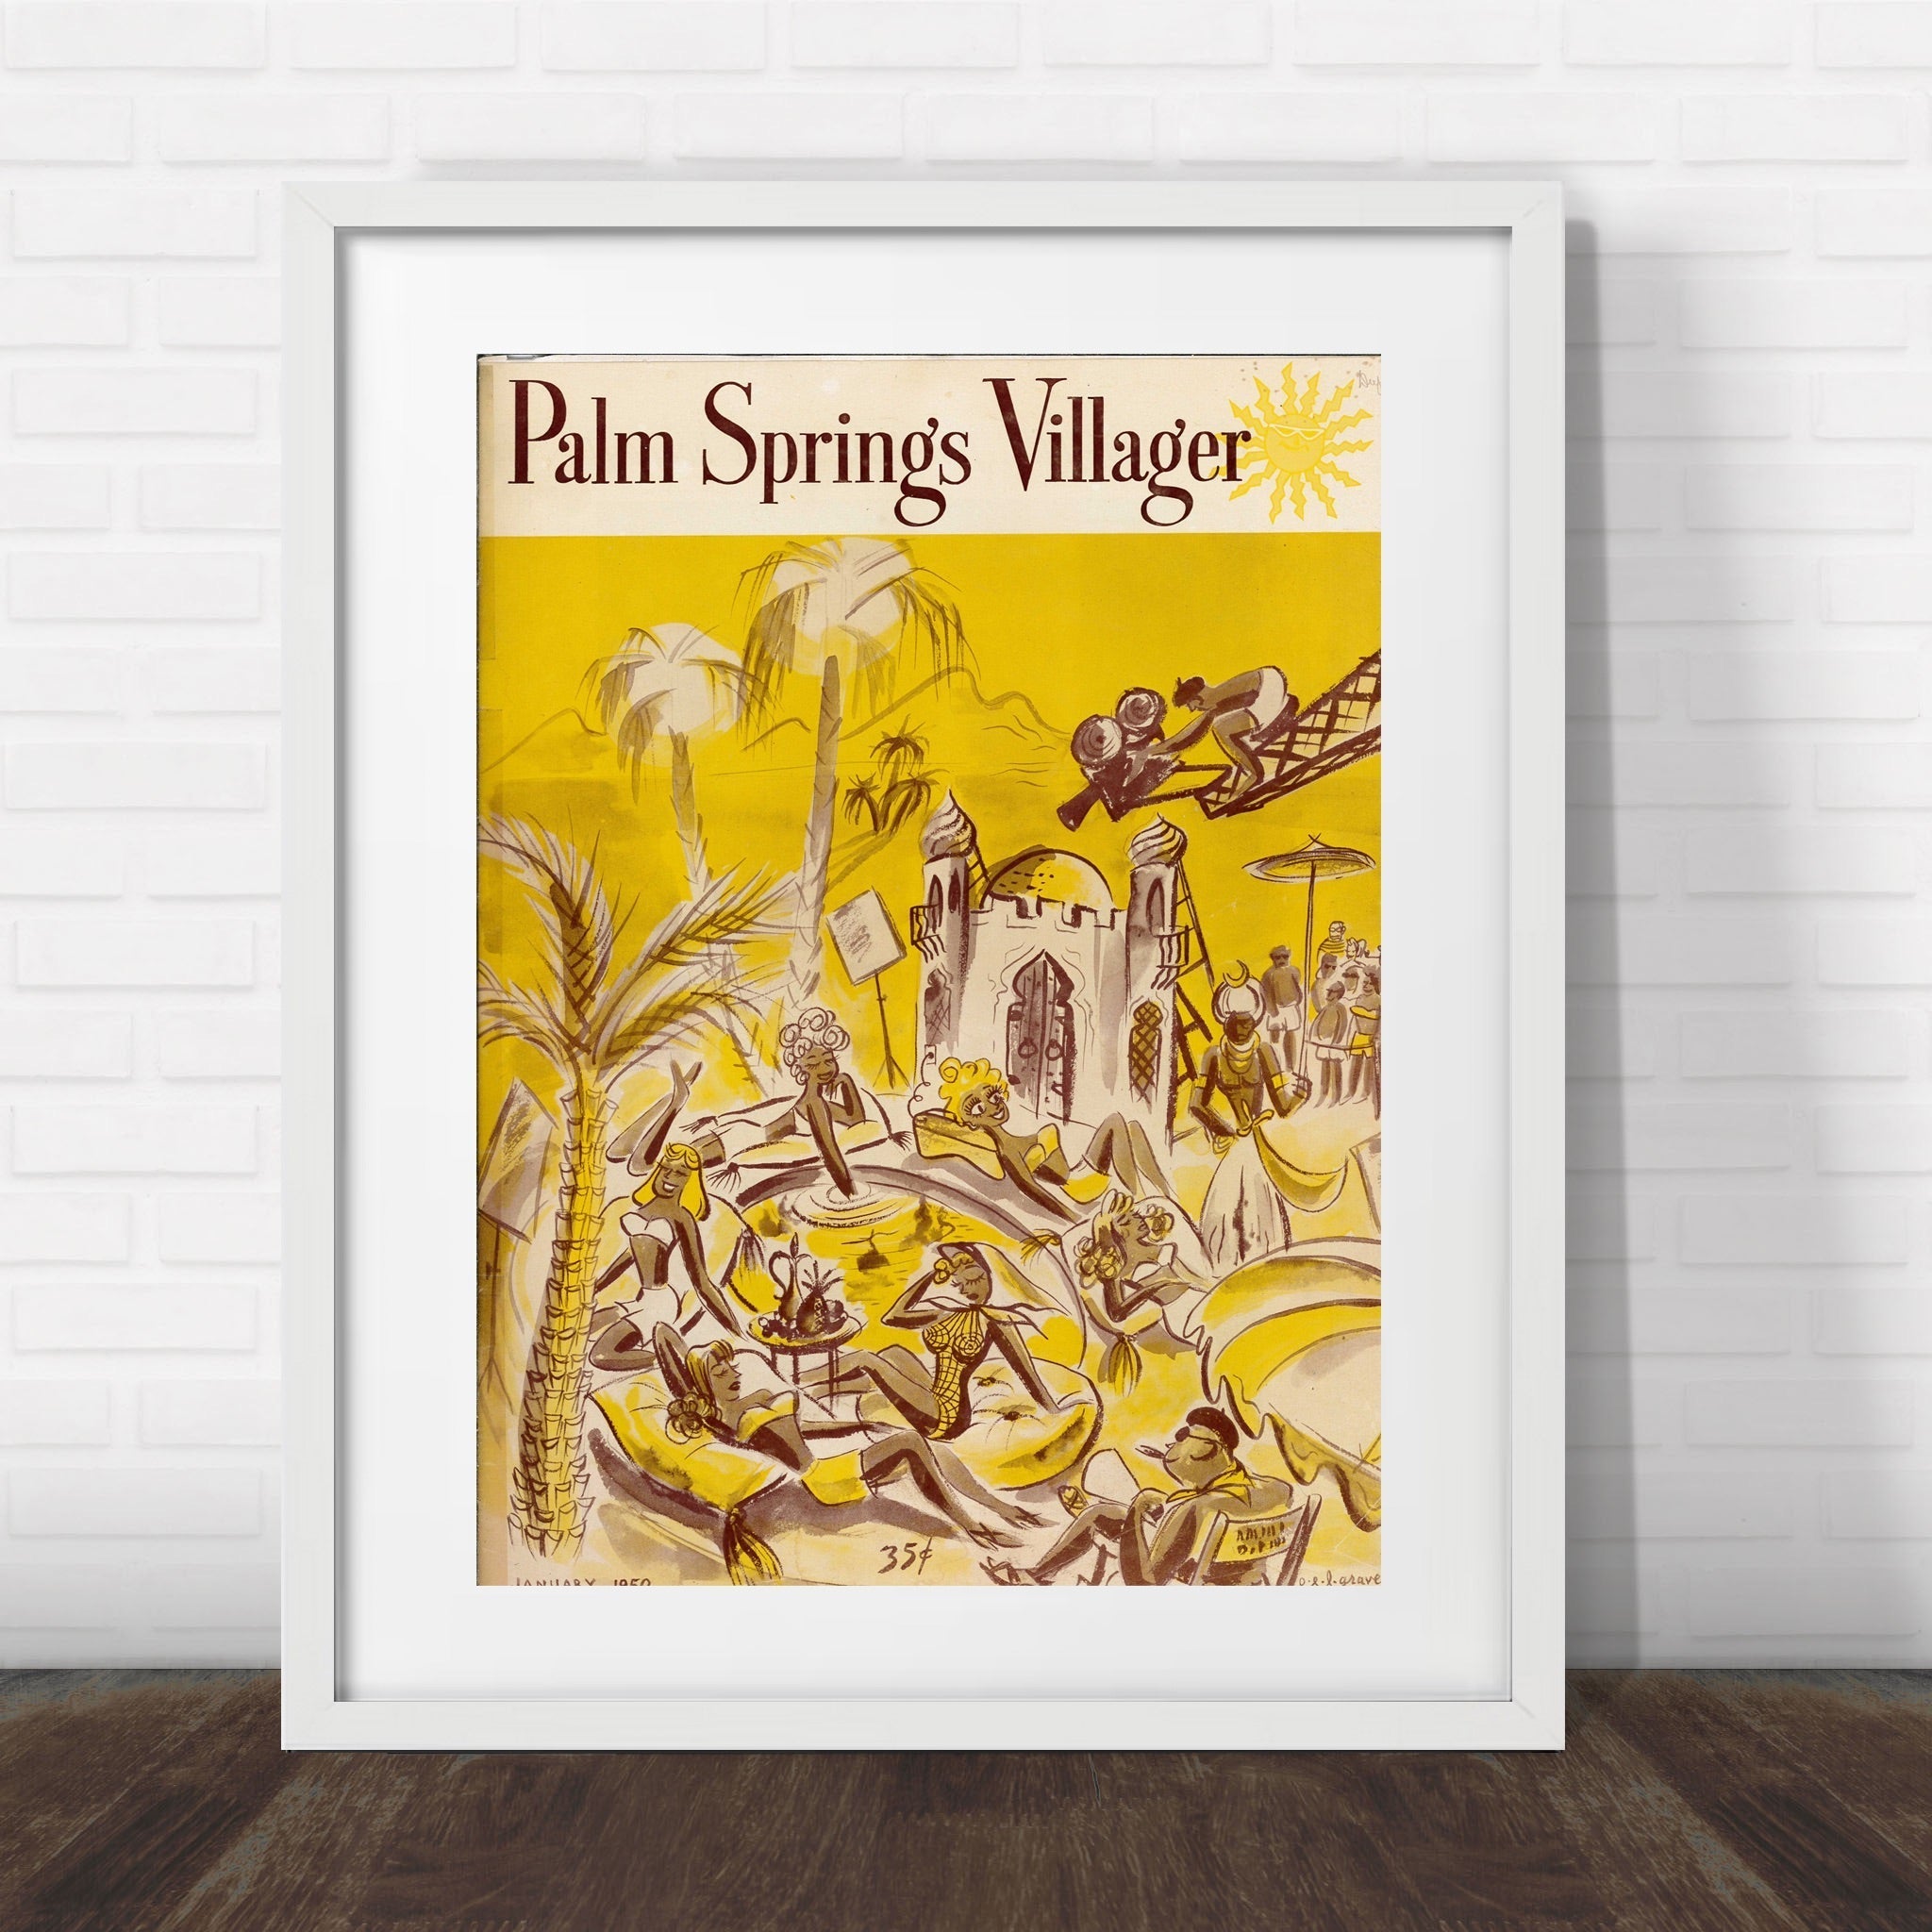 Palm Springs Villager - January 1950 - Cover Poster